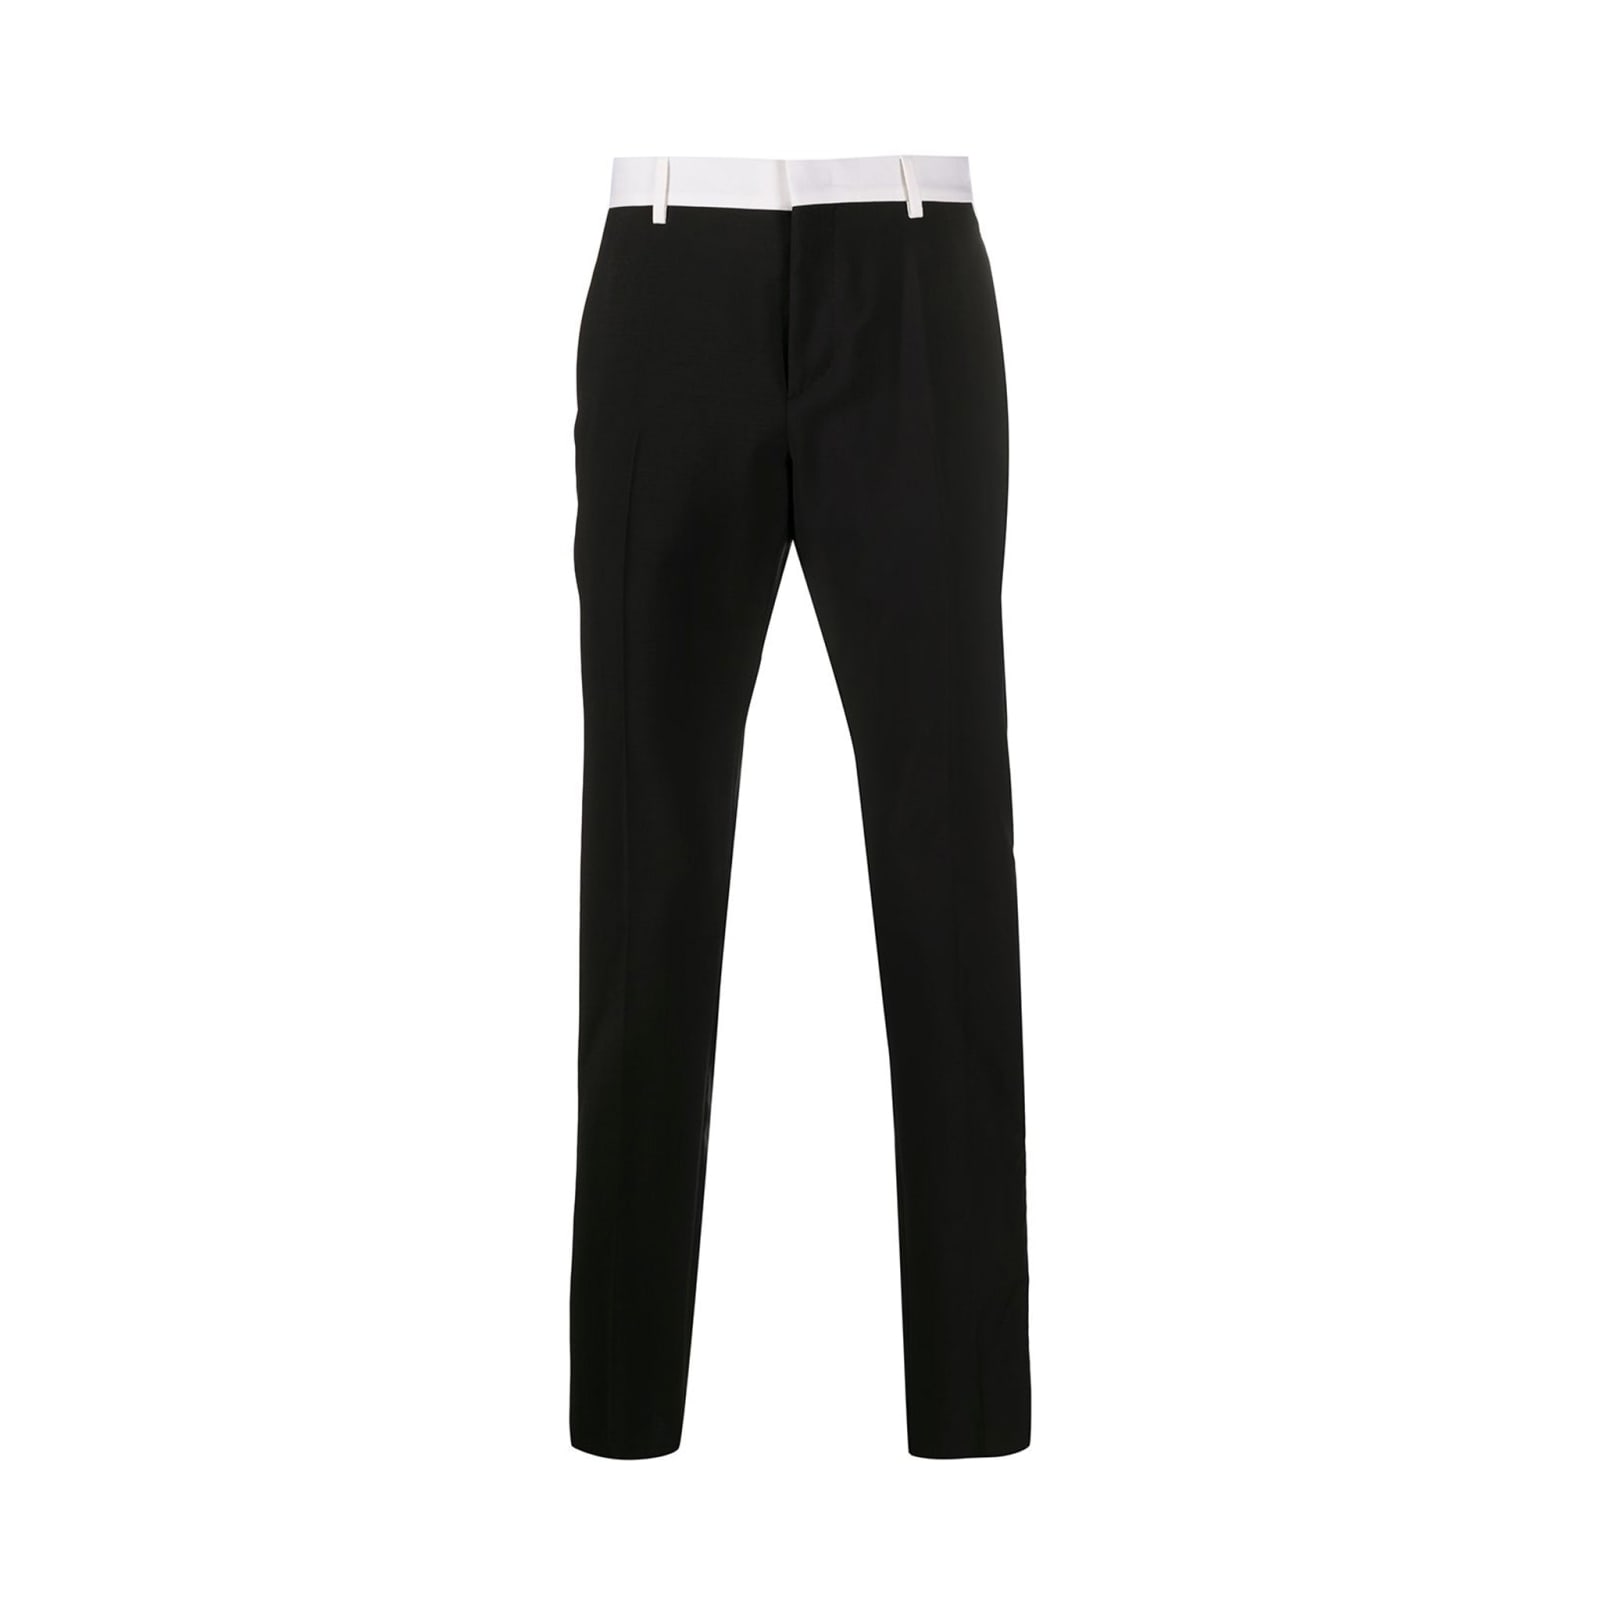 Contrast Panel Trousers